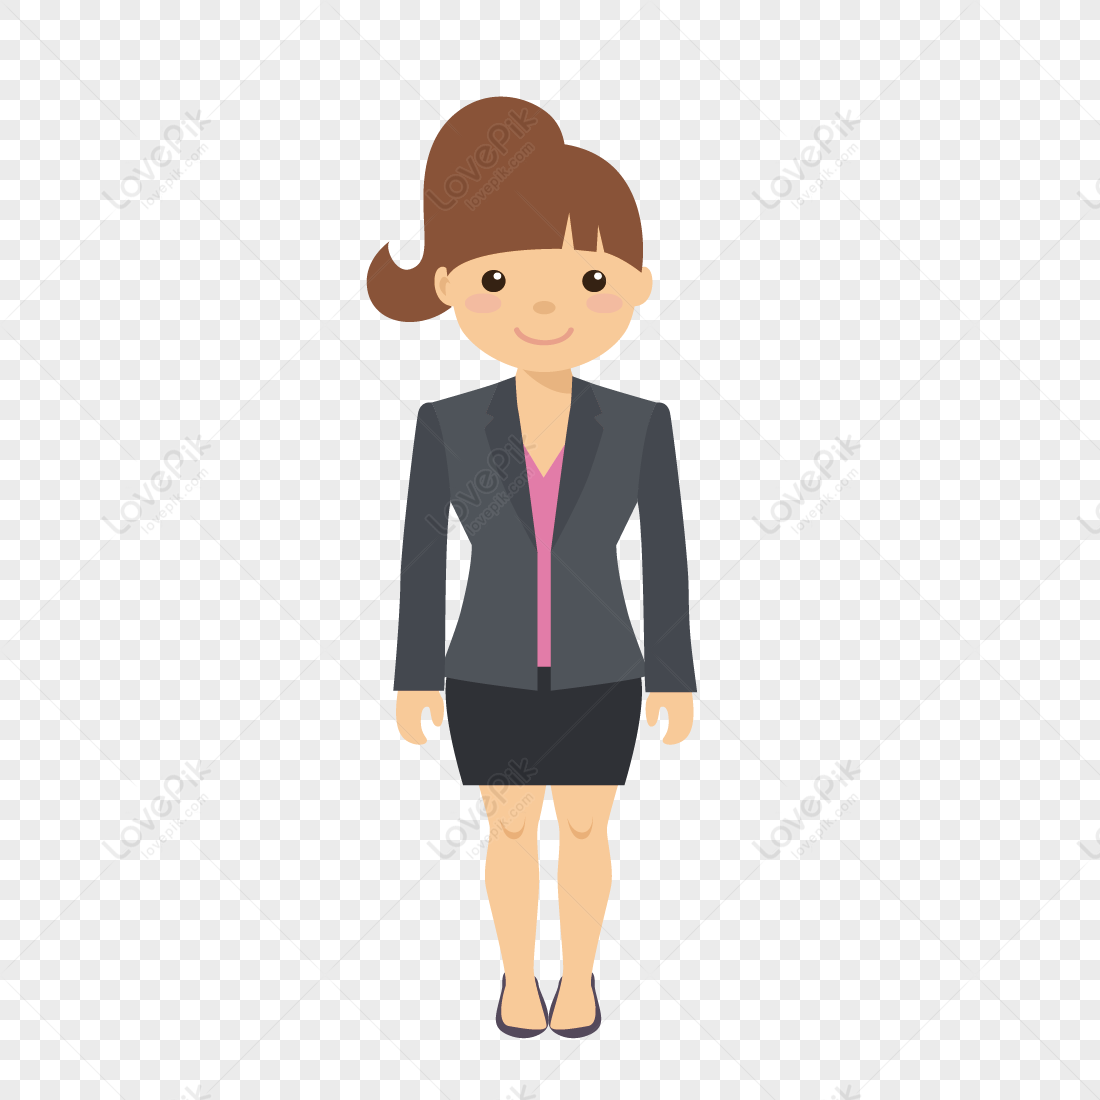 Working Lady PNG Picture And Clipart Image For Free Download - Lovepik |  400252925